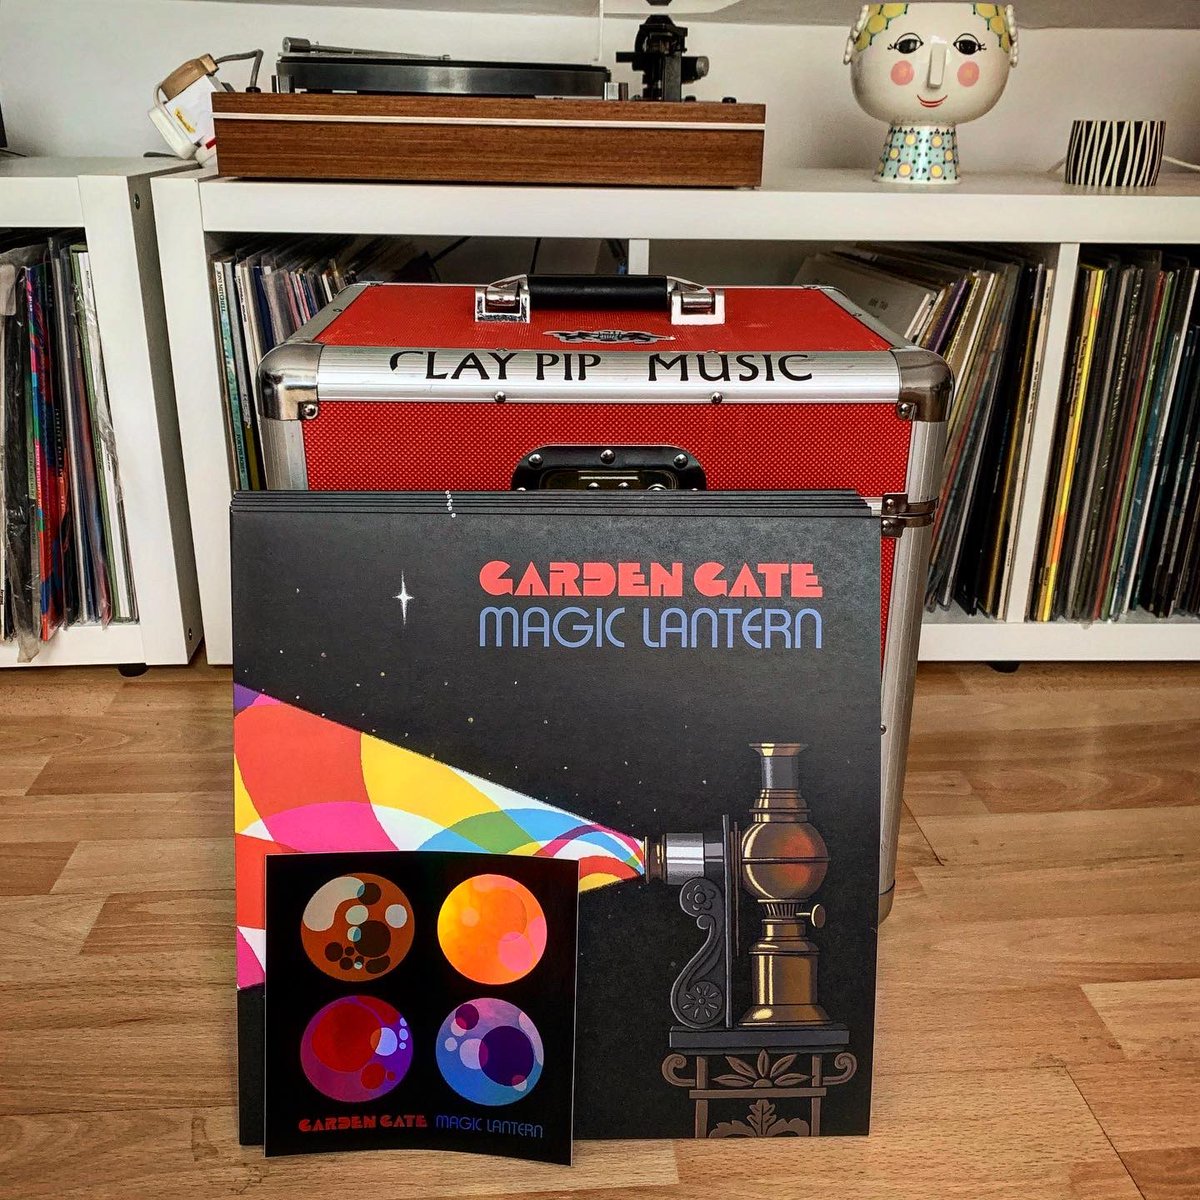 Sorting out what records to take to the label market @the_betsey tomorrow. If you would like to reserve a pre-release copy of Garden Gates ‘Magic Lantern’ @GardenGate69 give me a shout - I’ll have copies with the very limited holographic sticker.